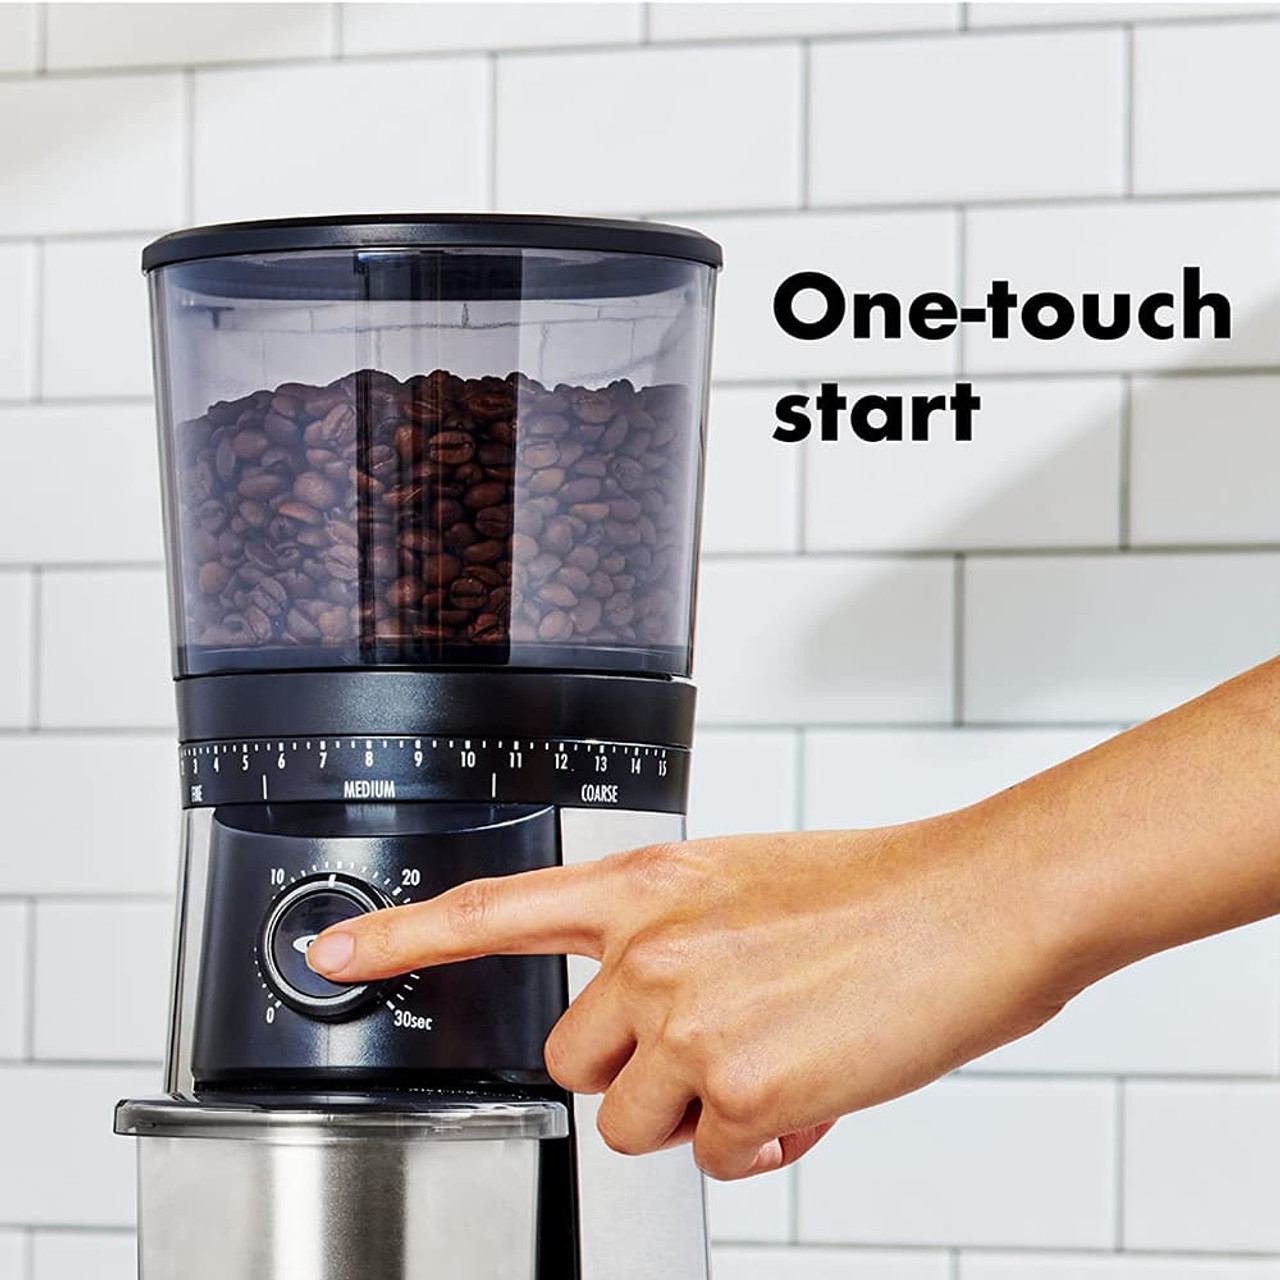 https://cdn11.bigcommerce.com/s-hccytny0od/images/stencil/1280x1280/products/4007/14693/oxo-brew-conical-burr-coffee-grinder-8__69517.1618143576.jpg?c=2?imbypass=on